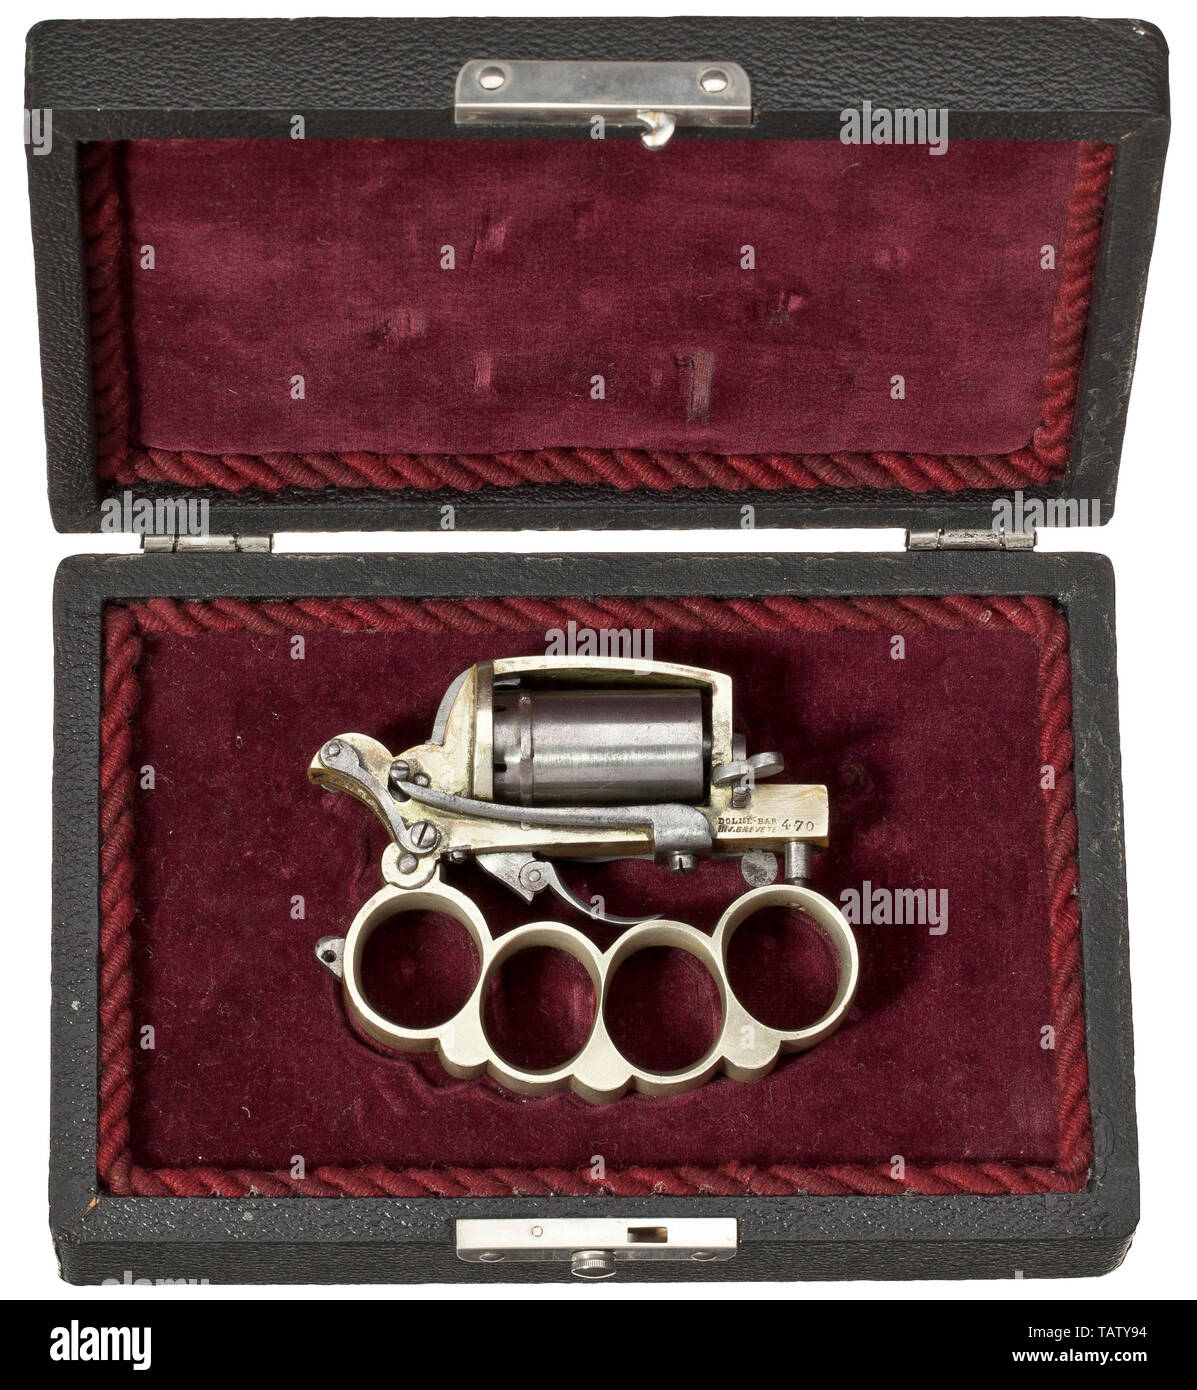 An 'Apache' revolver, Dolne System, in its case, circa 1870, A combination of revolver, waved dagger and knuckleduster. In rare calibre 5 mm SF. no. 470. Front right of frame signed 'DOLNE-BAR / INV.BREVETE 470'. Produced in Liège. Double action. Early model with unfluted, six-shot cylinder. Folding trigger. Steel cylinder, dagger, trigger, fittings and screws, without finish. Nickel frame and knuckleduster, partially few spots. Very good overall condition of a rare collector's item. Gentle cleaning may improve appearance. Comes in black, later i, Additional-Rights-Clearance-Info-Not-Available Stock Photo